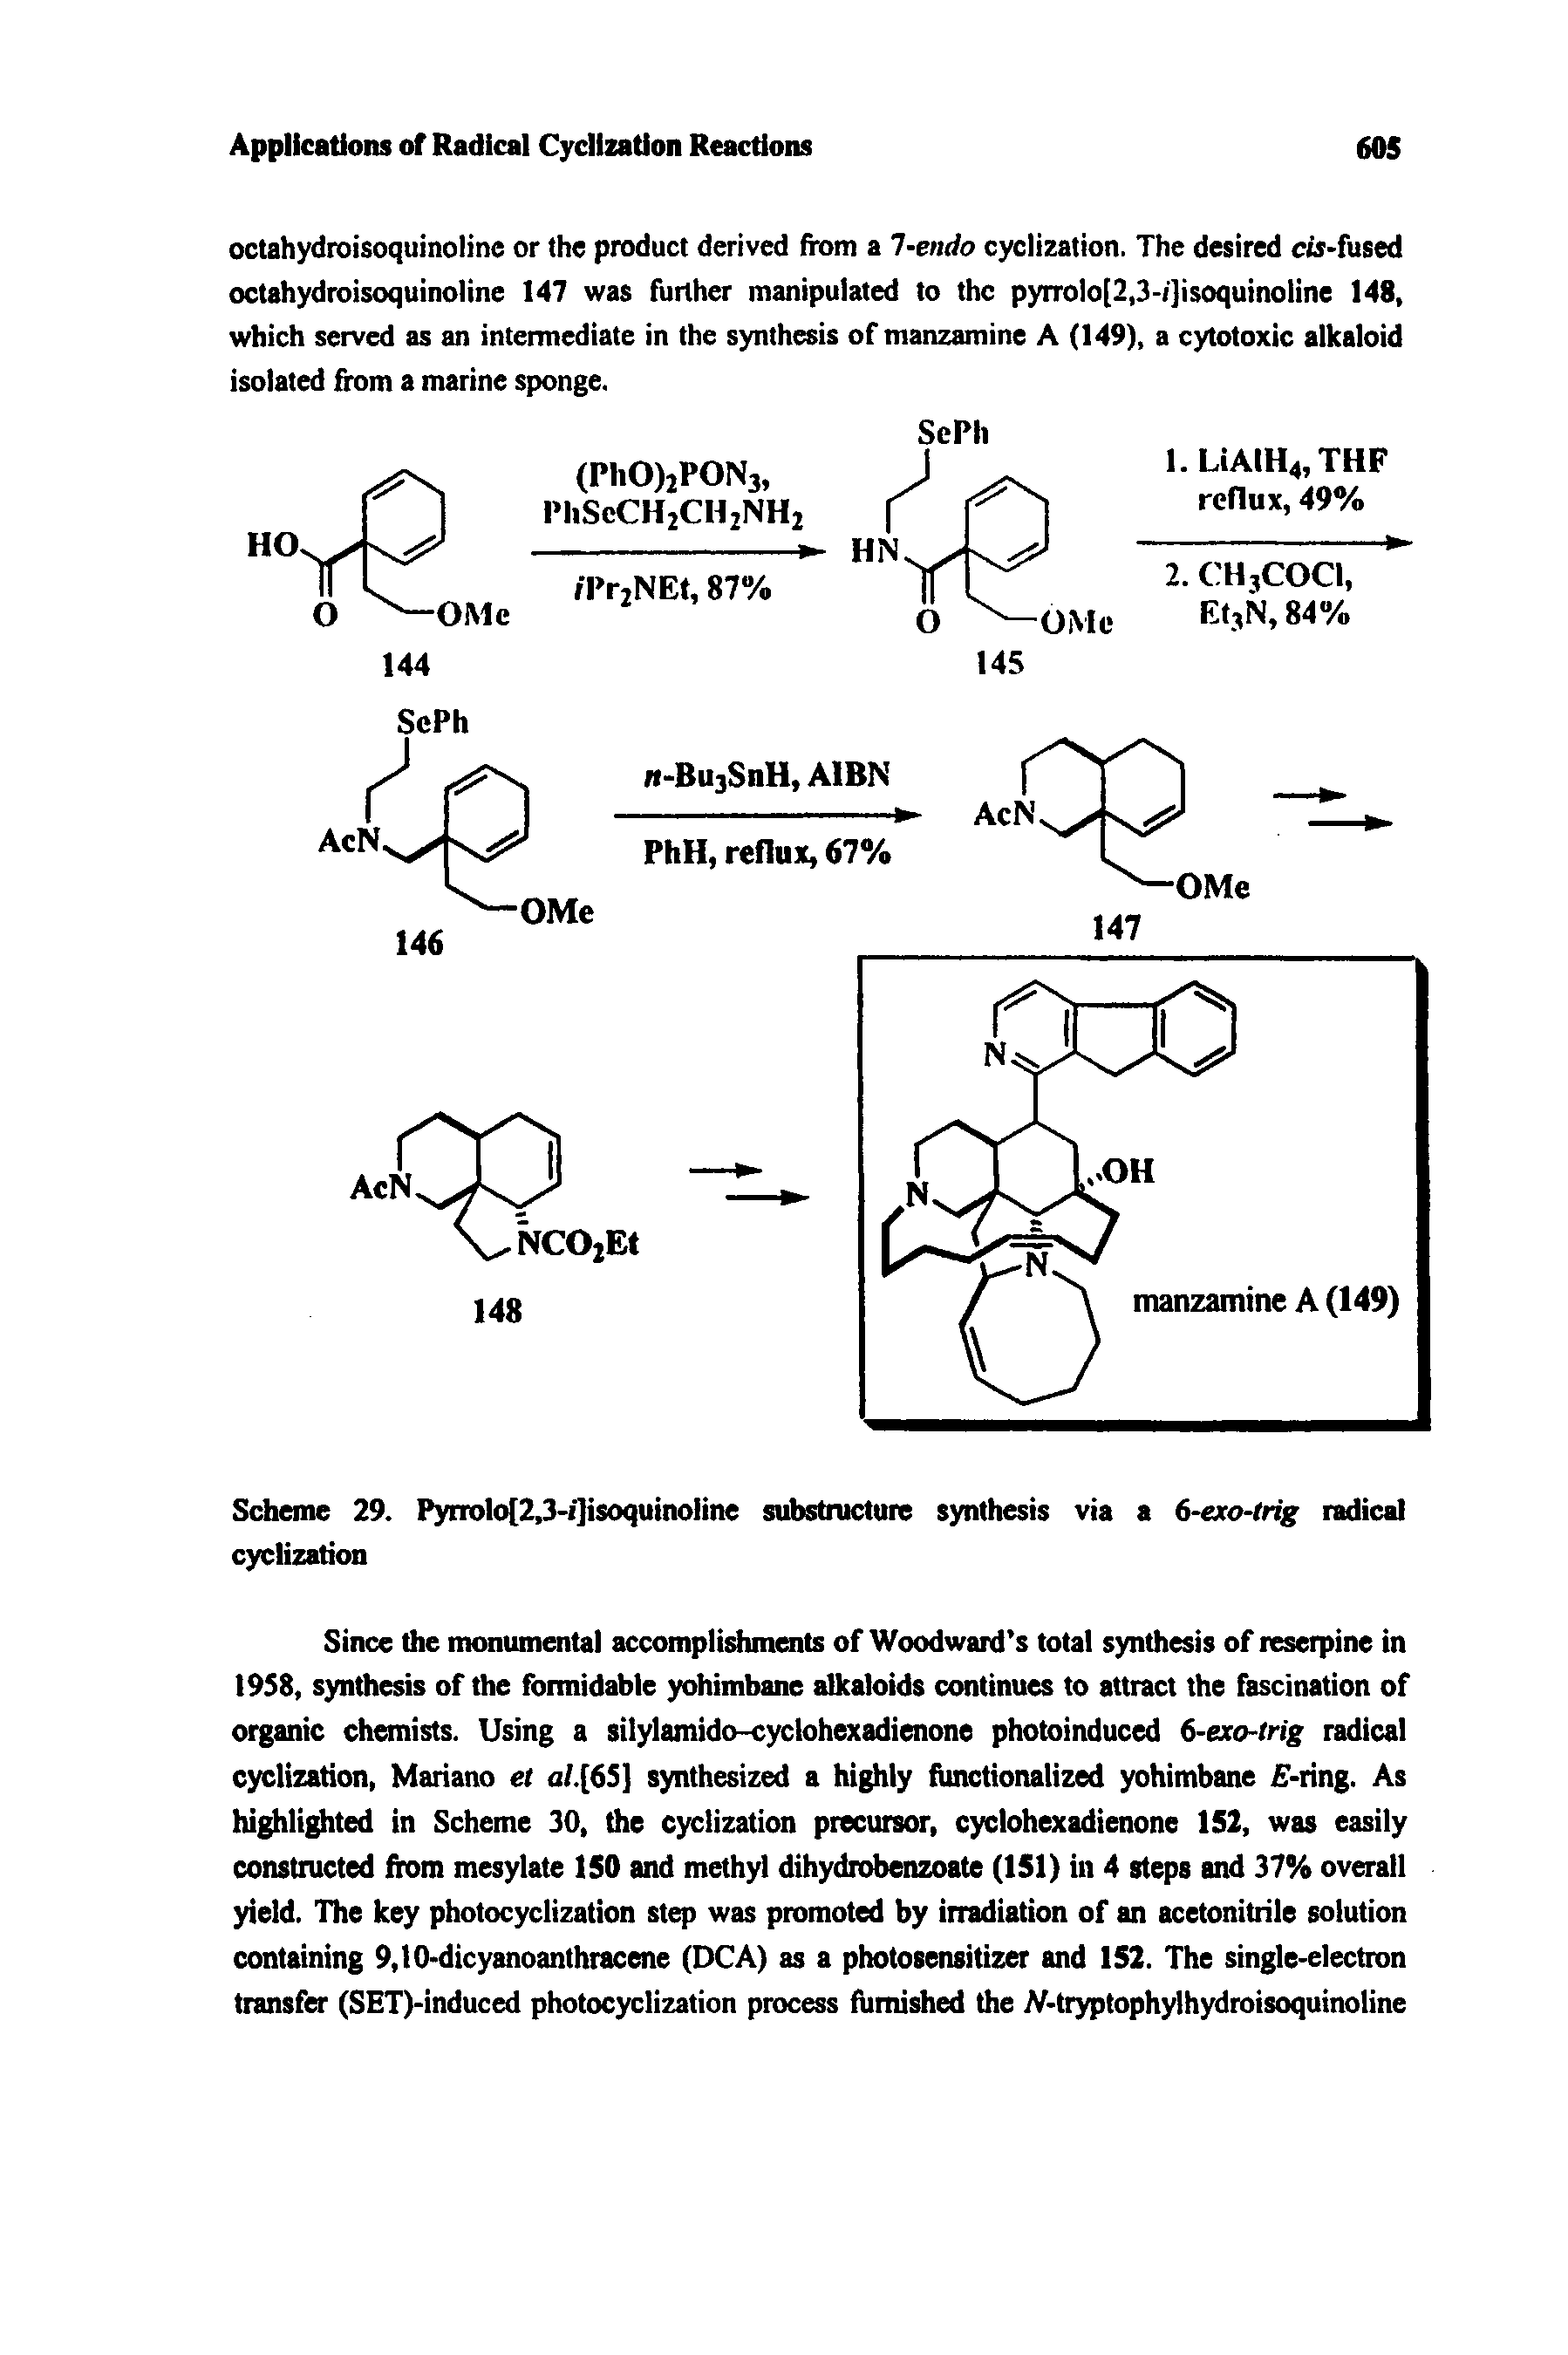 Scheme 29. Pyrrolo[2,3-i ]isoquinoline substructure synthesis via a 6-exo-trig radical cyclization...